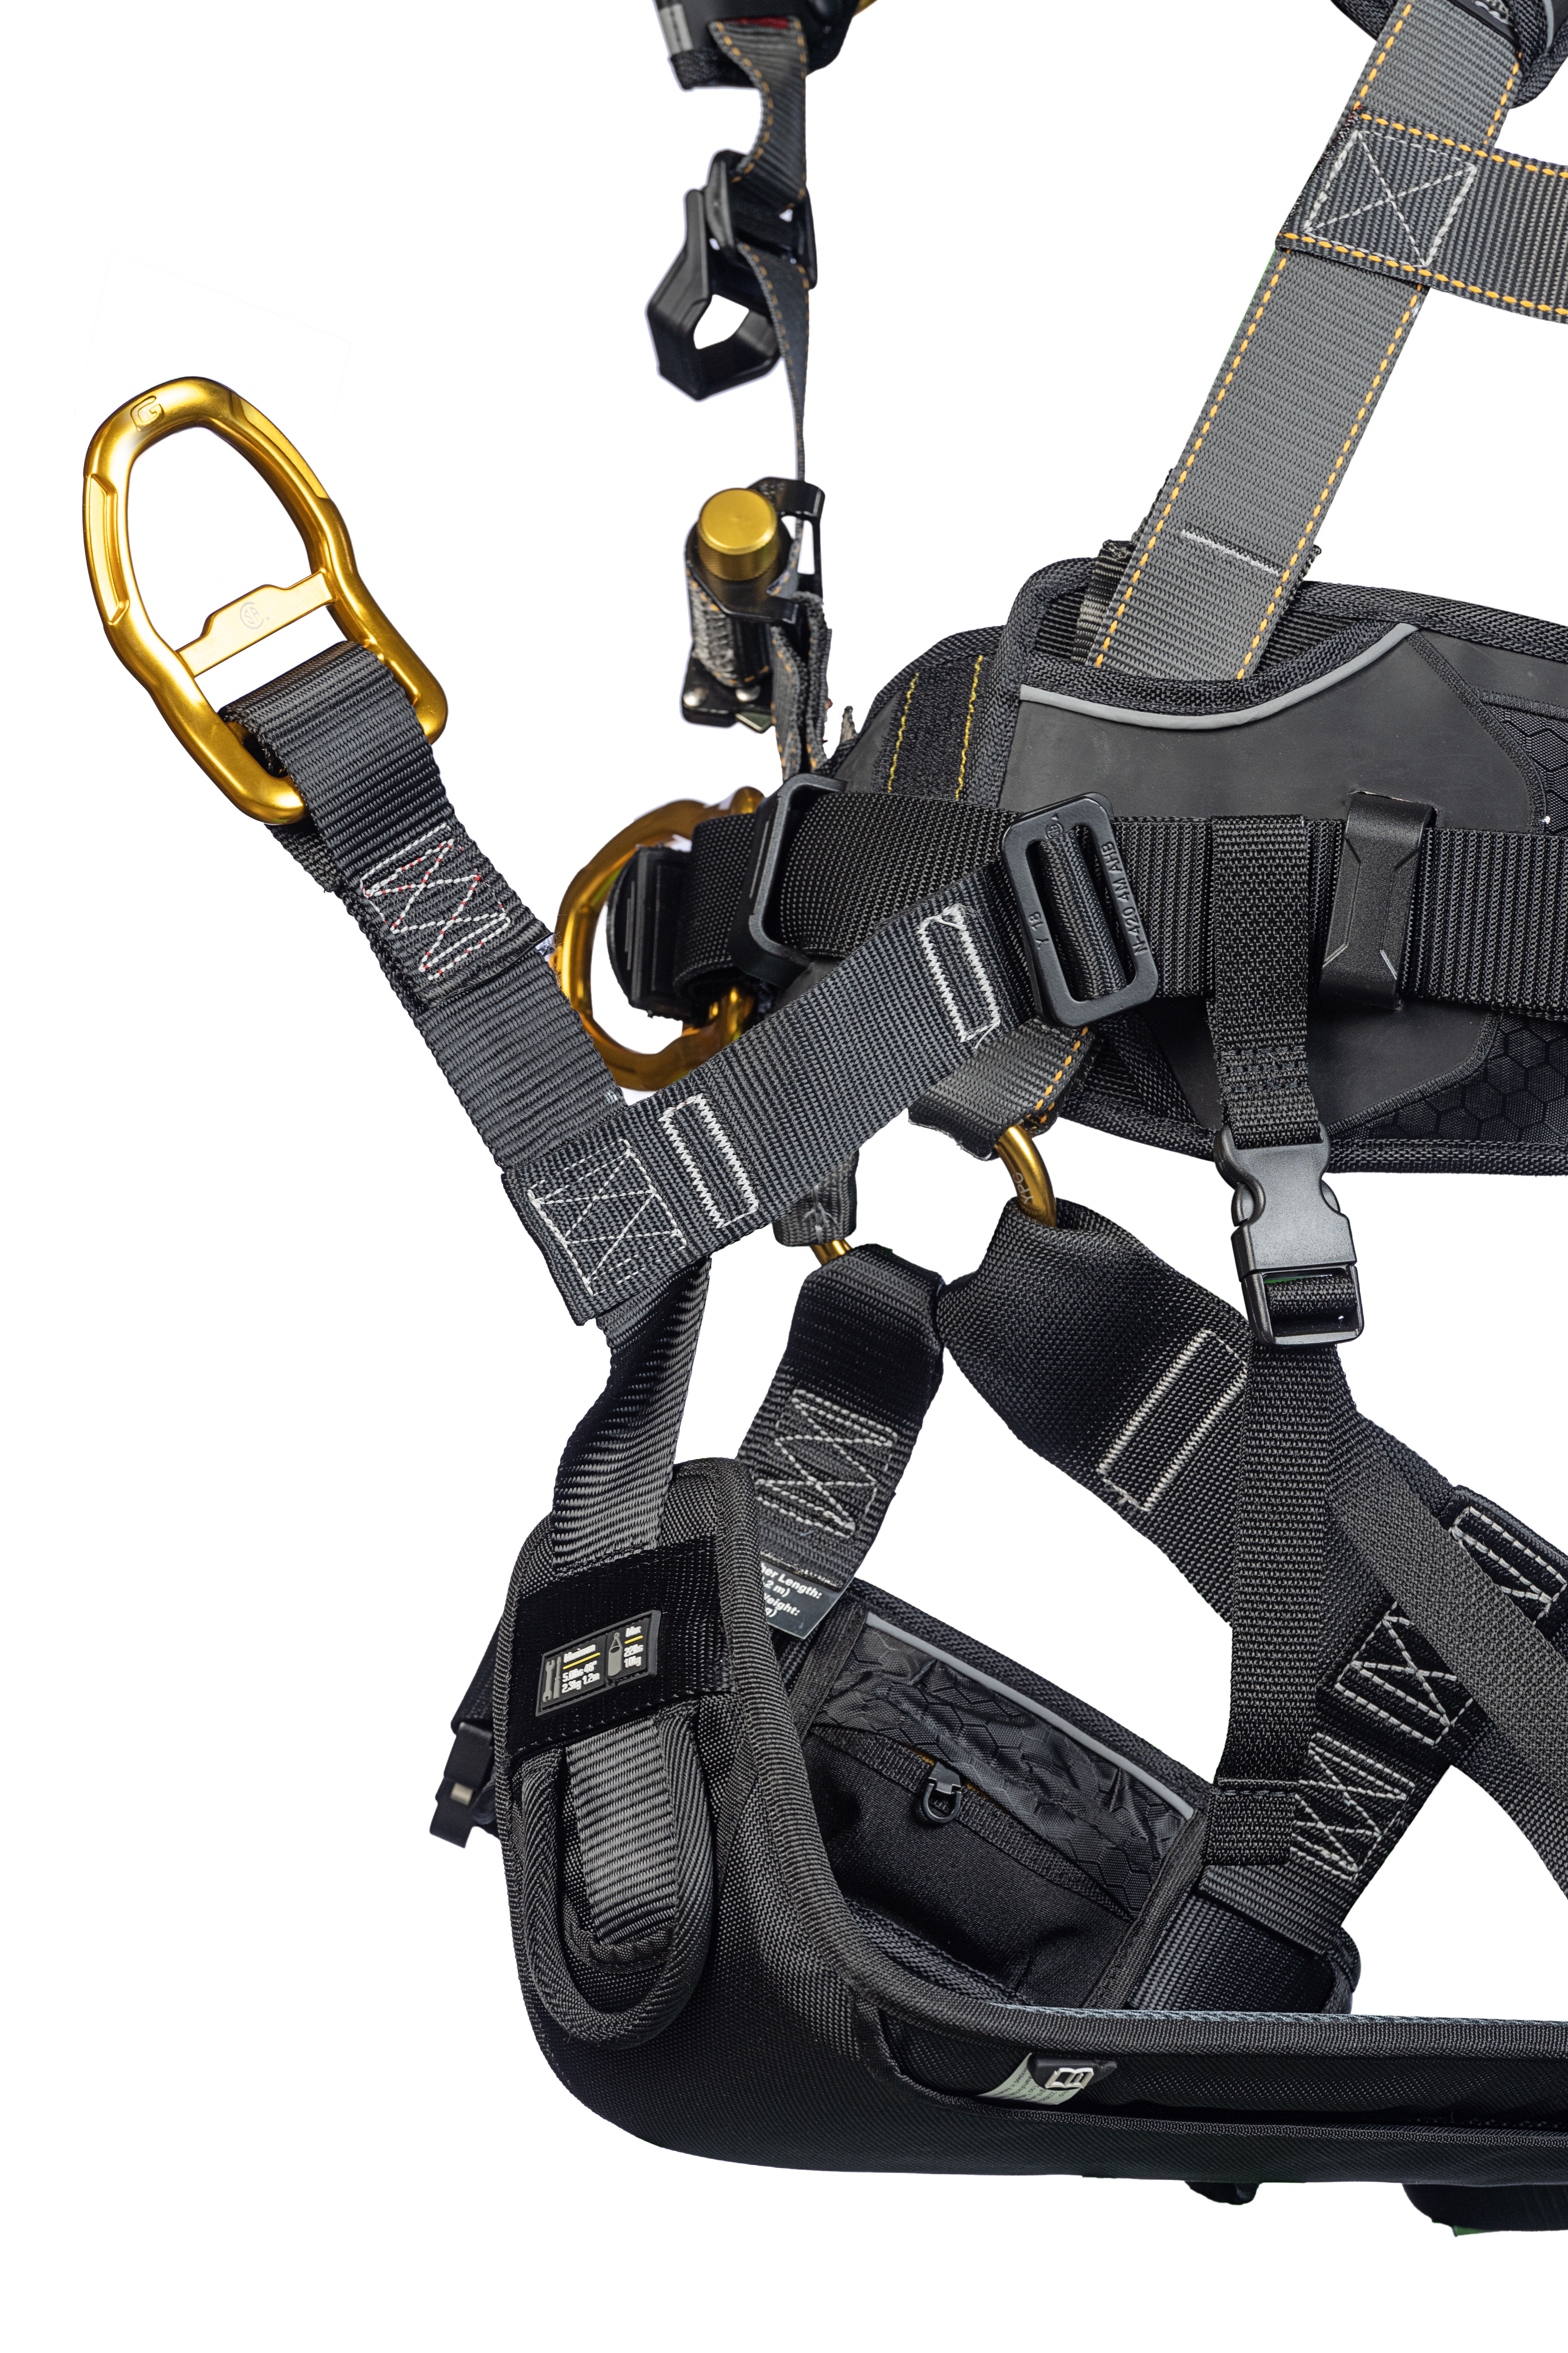 Guardian B7-Comfort Tower Climbing Harness from GME Supply